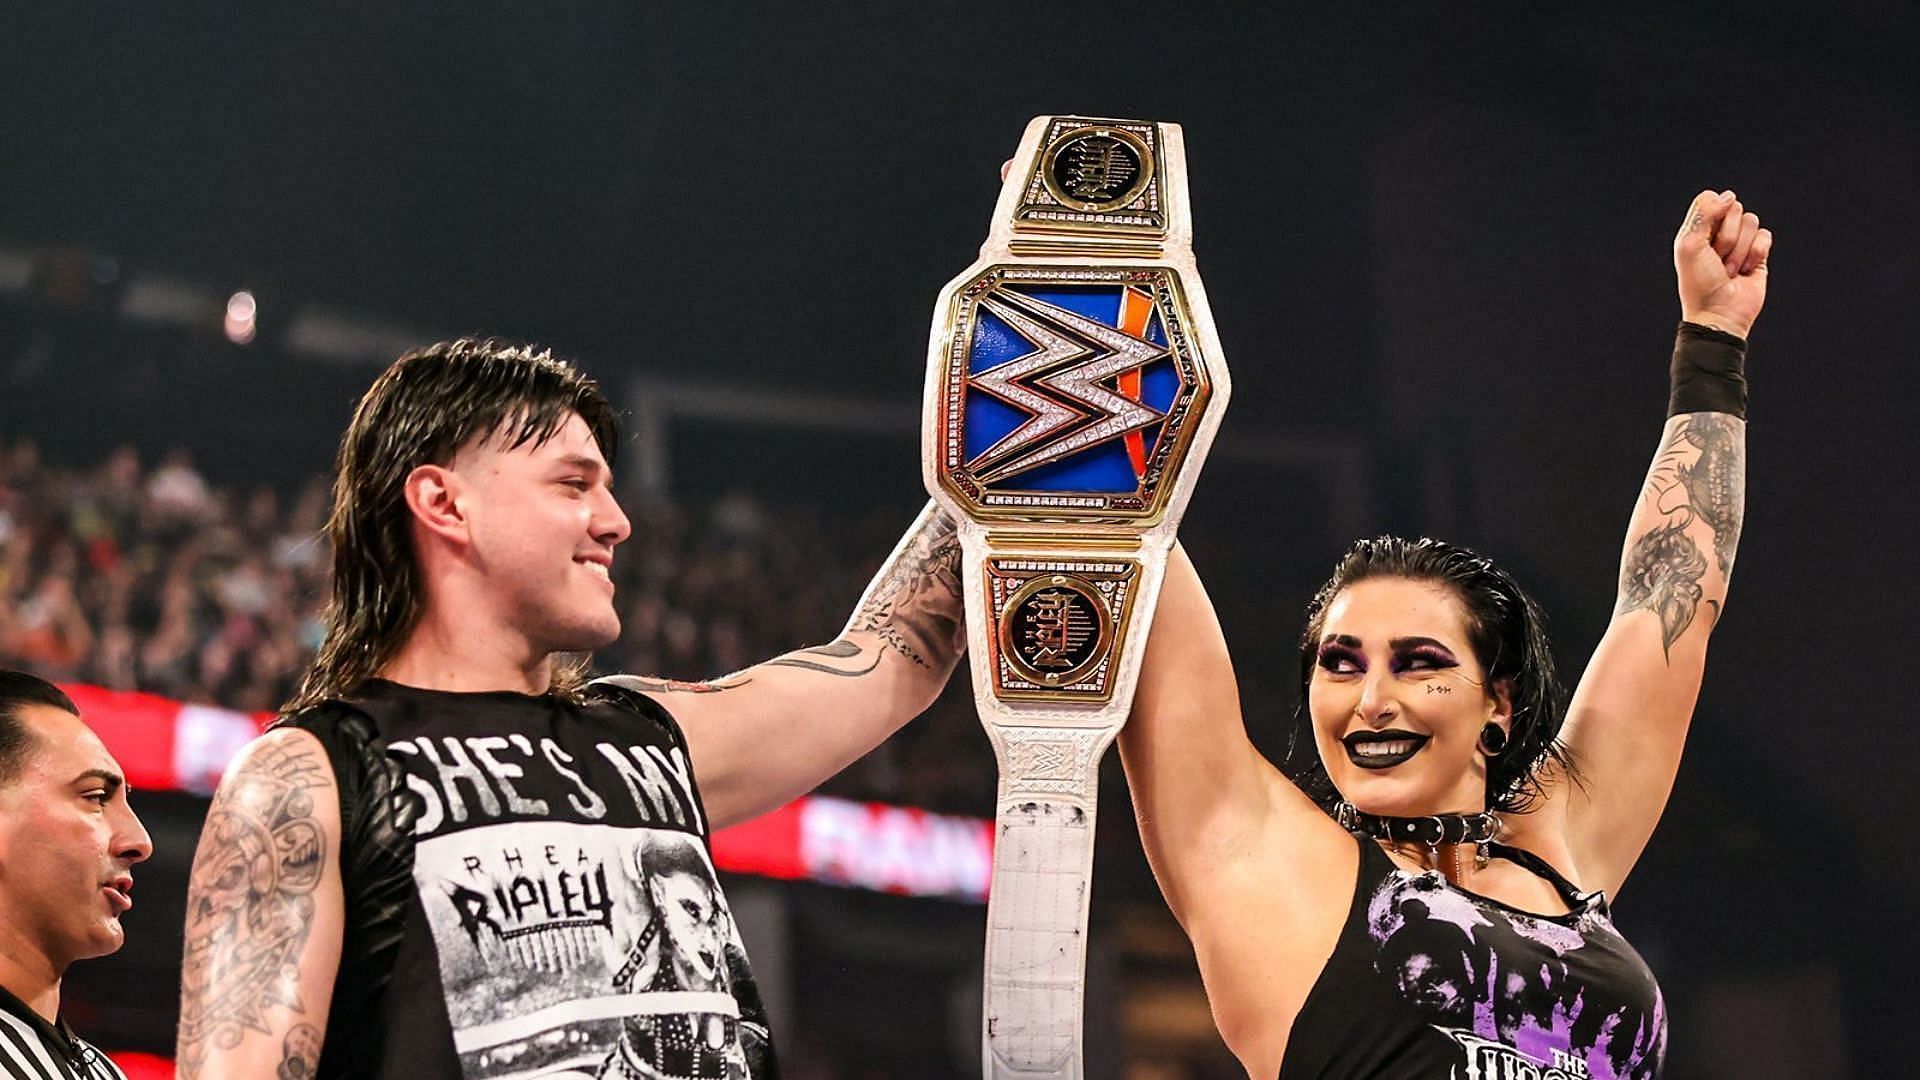 Ripley will defend her title at WWE Payback